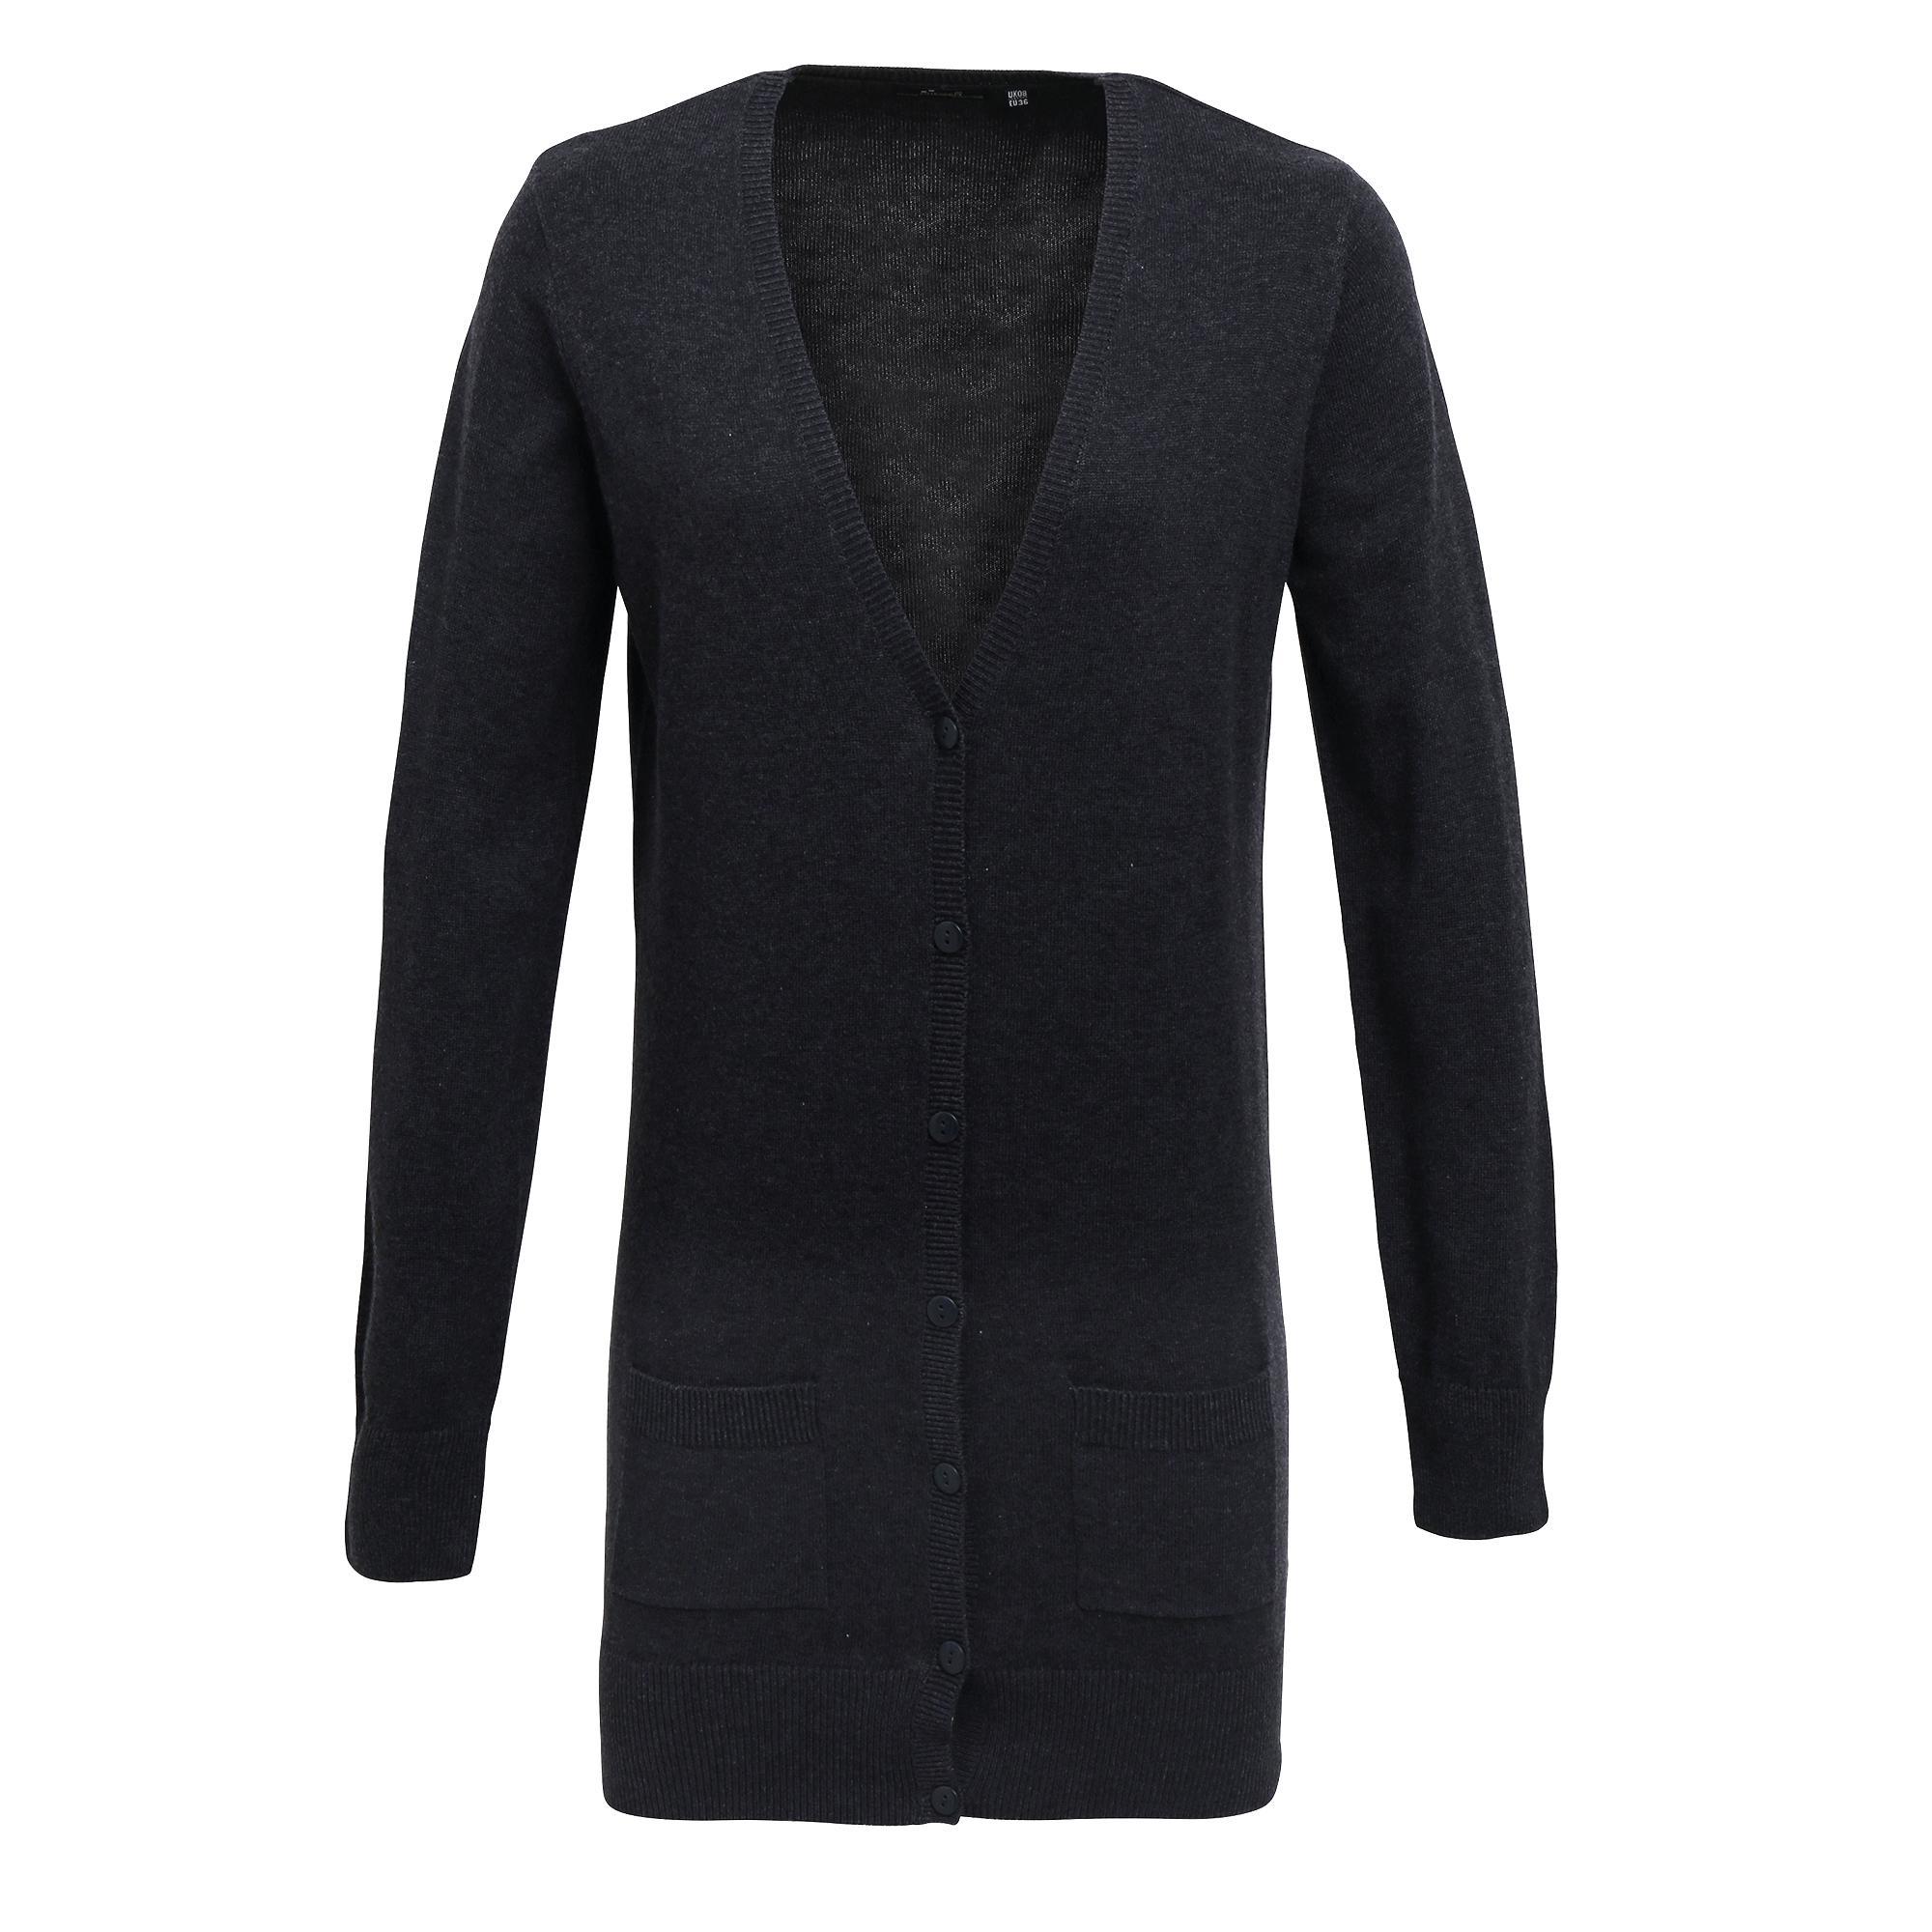 Premier Womens/Ladies Longline V Neck Knitted Cardigan (Charcoal) (20)